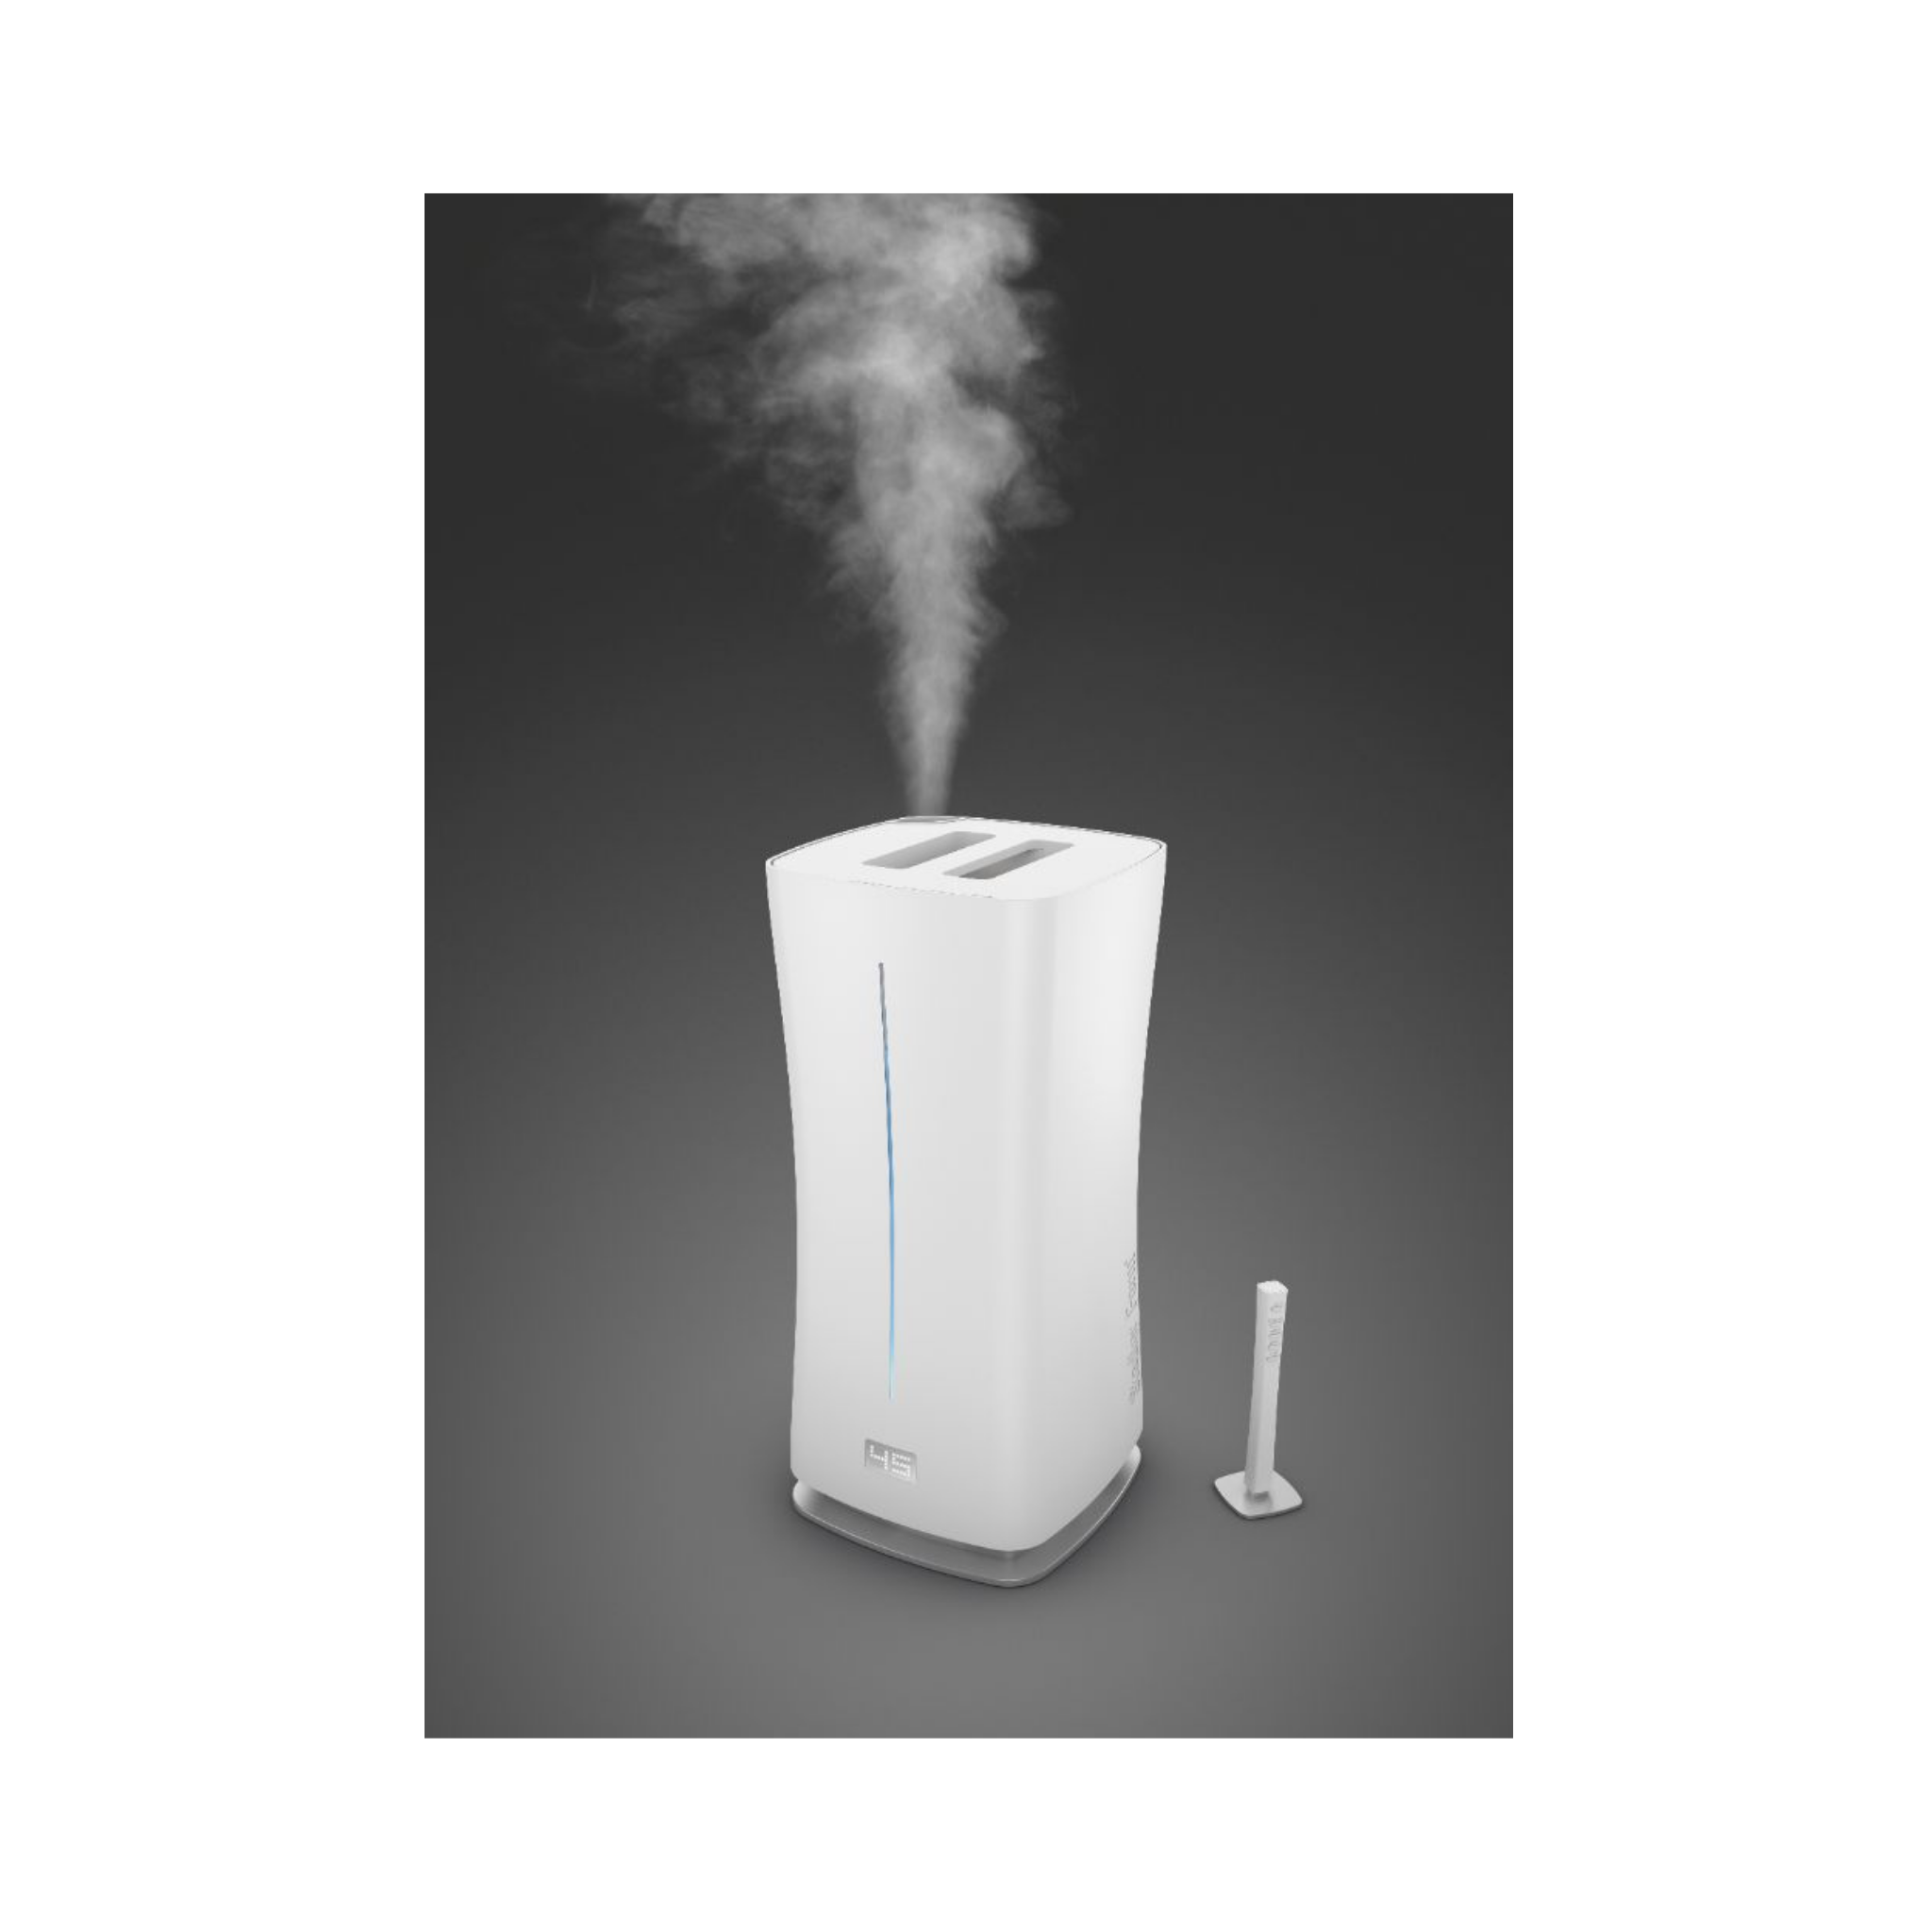 Stadler Form Eva Humidifier 6.3L Ultrasonic Humidifier with Oil Diffuser, Hot and Cold Mist, Remote Control and Sensor, Hygrometer, and Night Mode - For Big Rooms up to 80m², 2 Years Warranty